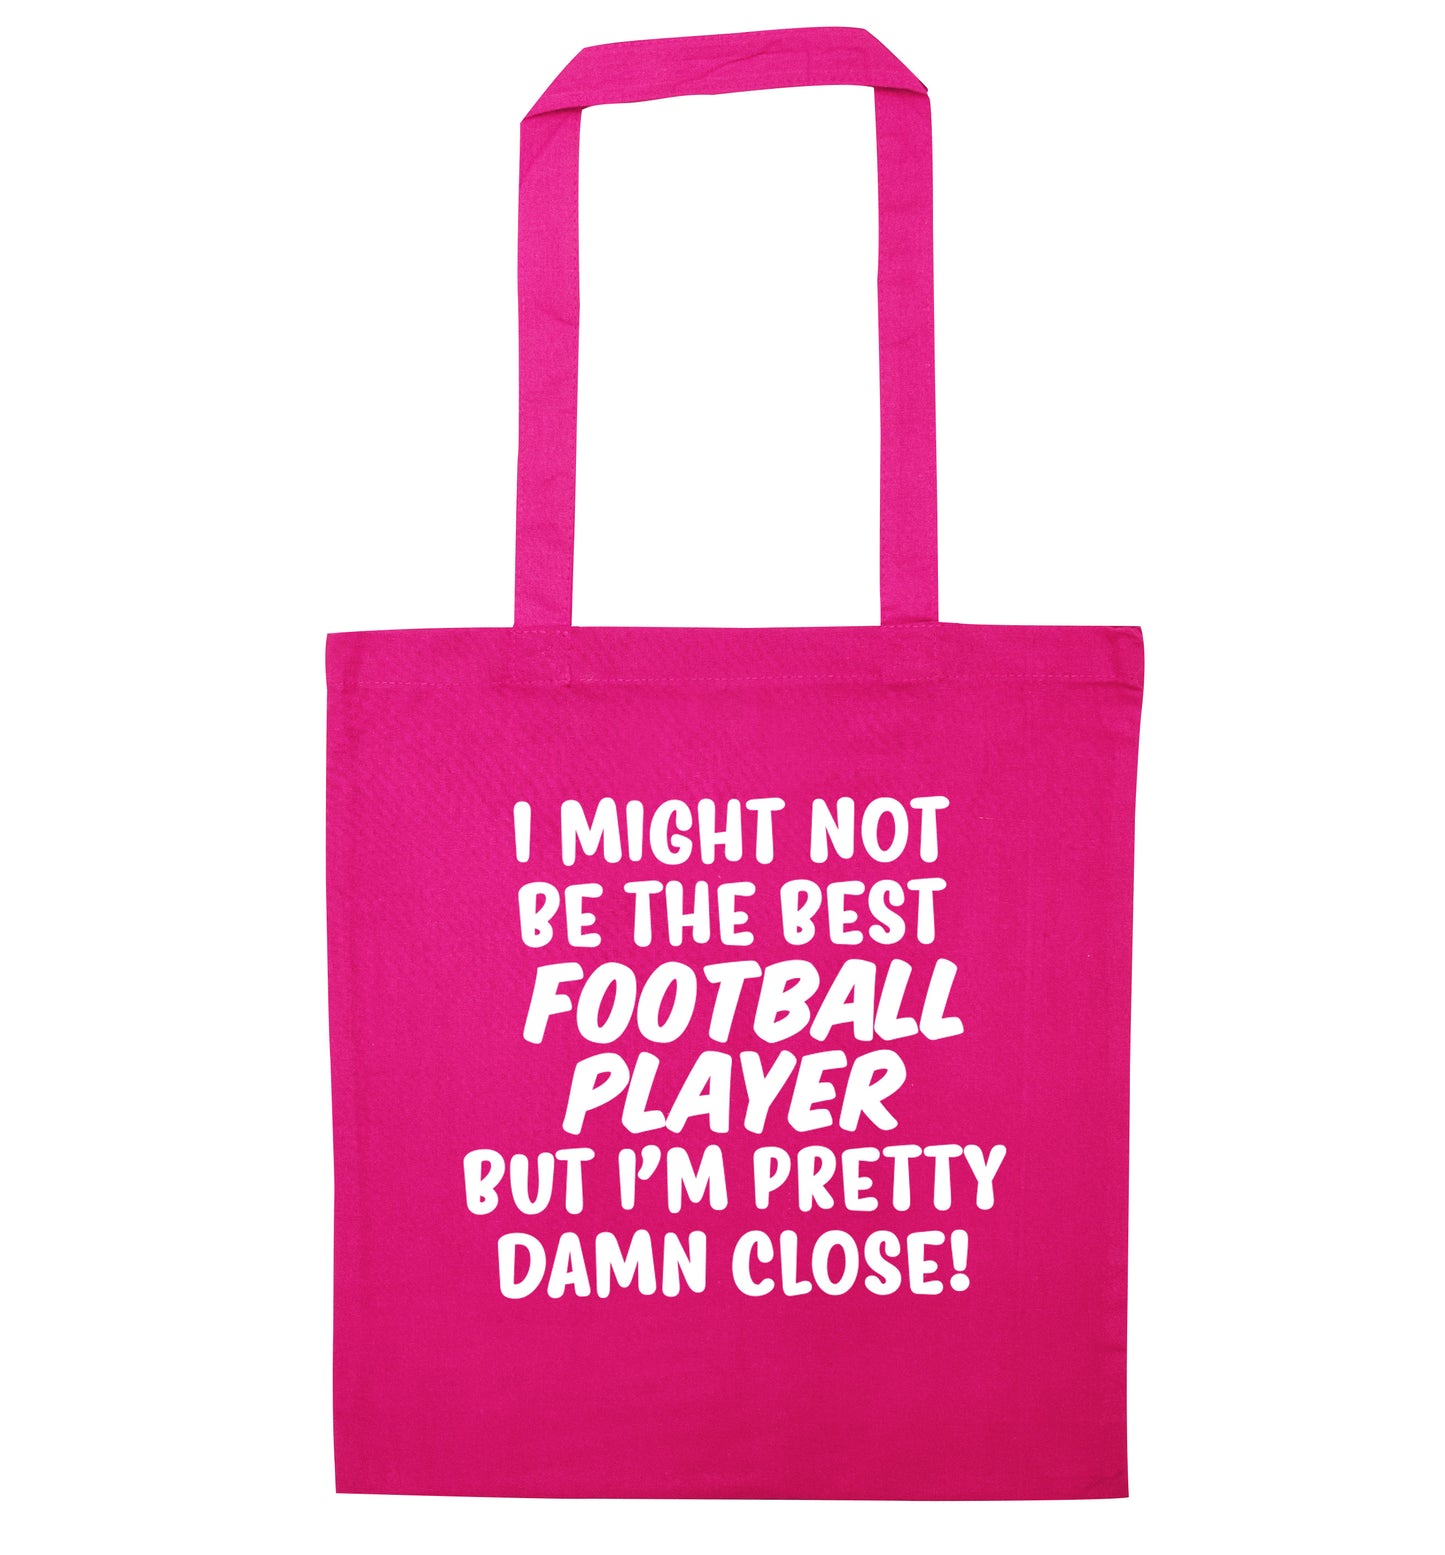 I might not be the best football player but I'm pretty close! pink tote bag